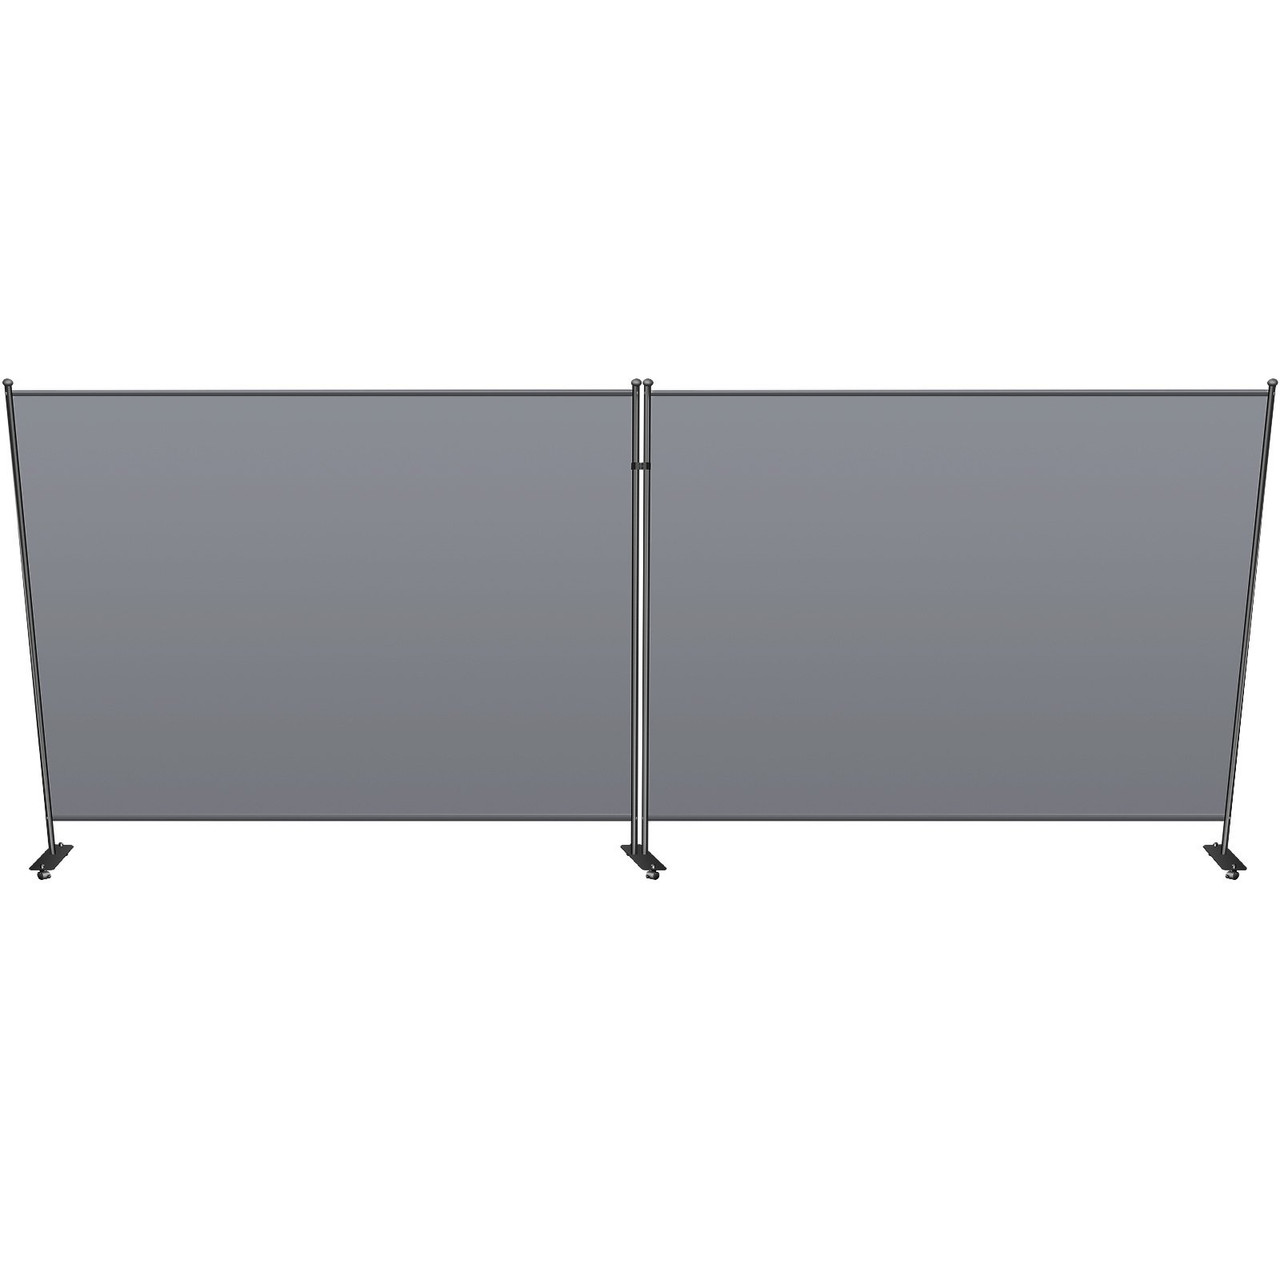 VEVOR Office Partition 142\" W x 14\"" D x 72\"" H Room Divider Wall 2-Panel Office Divider Folding Portable Office Walls Dividers with Non-See-Through Fabric Room Partition Gray for Room Office Restaur"